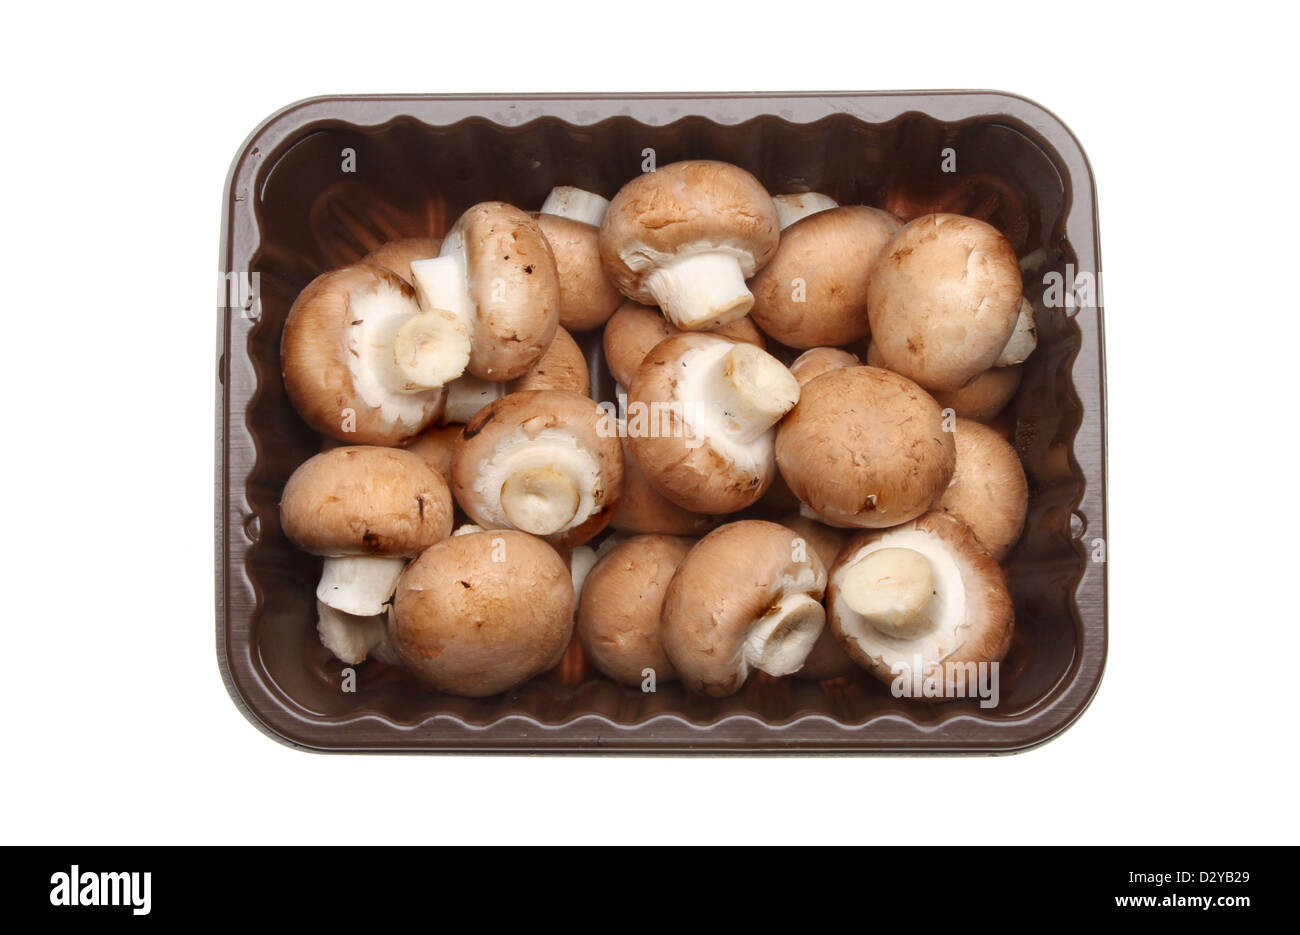 Chestnut mushrooms in a plastic tray isolated against white Stock Photo